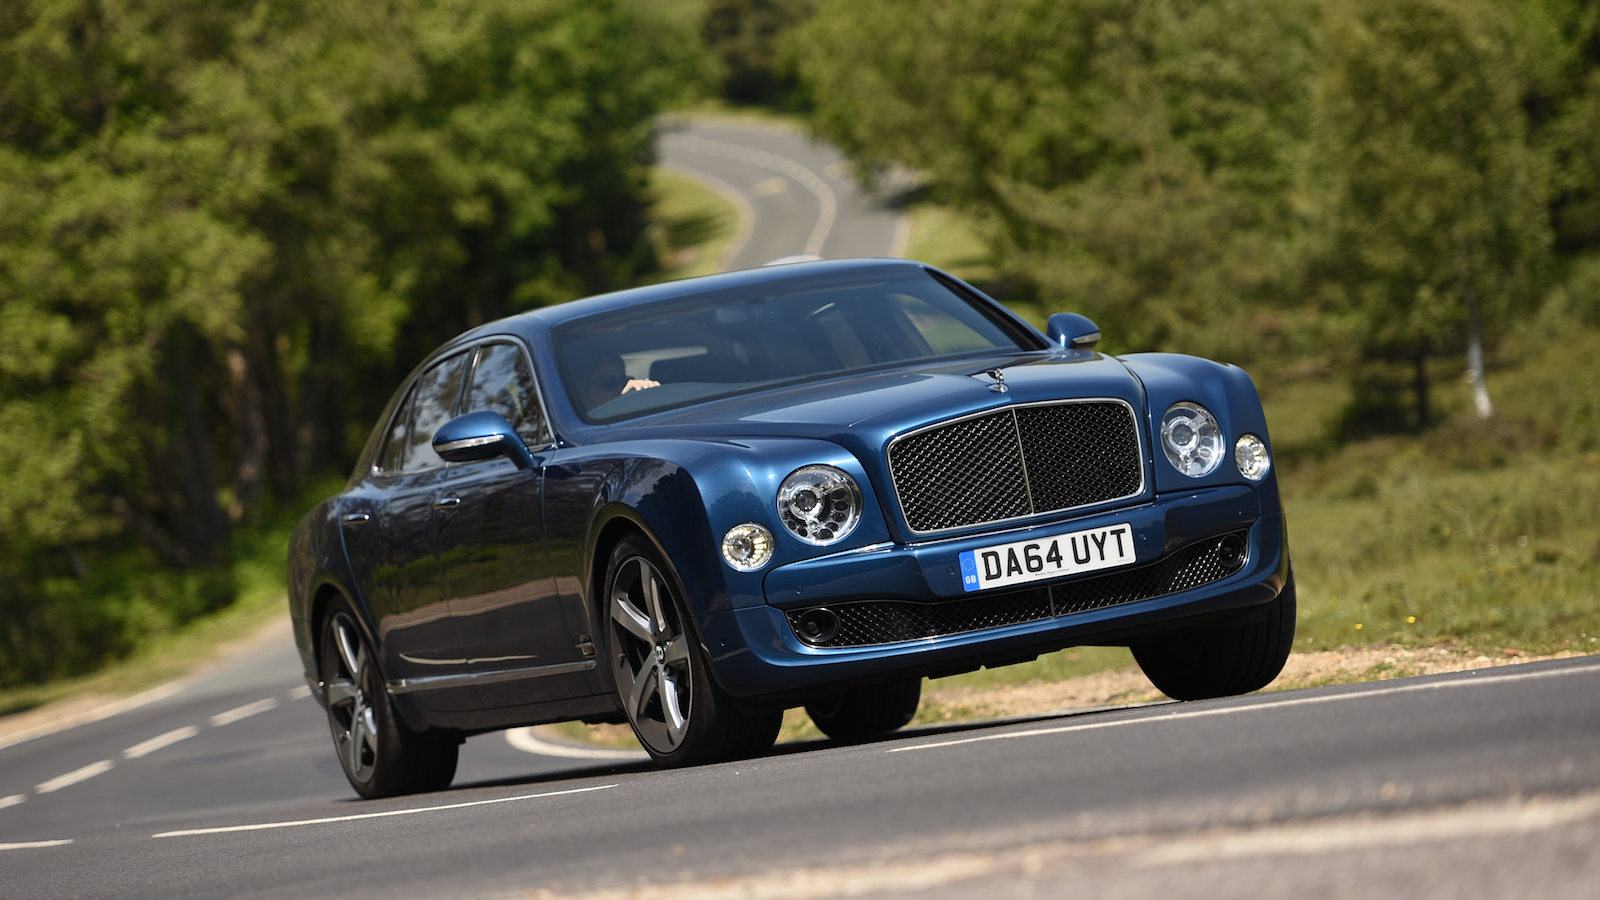 Bentley’s V8 bows out